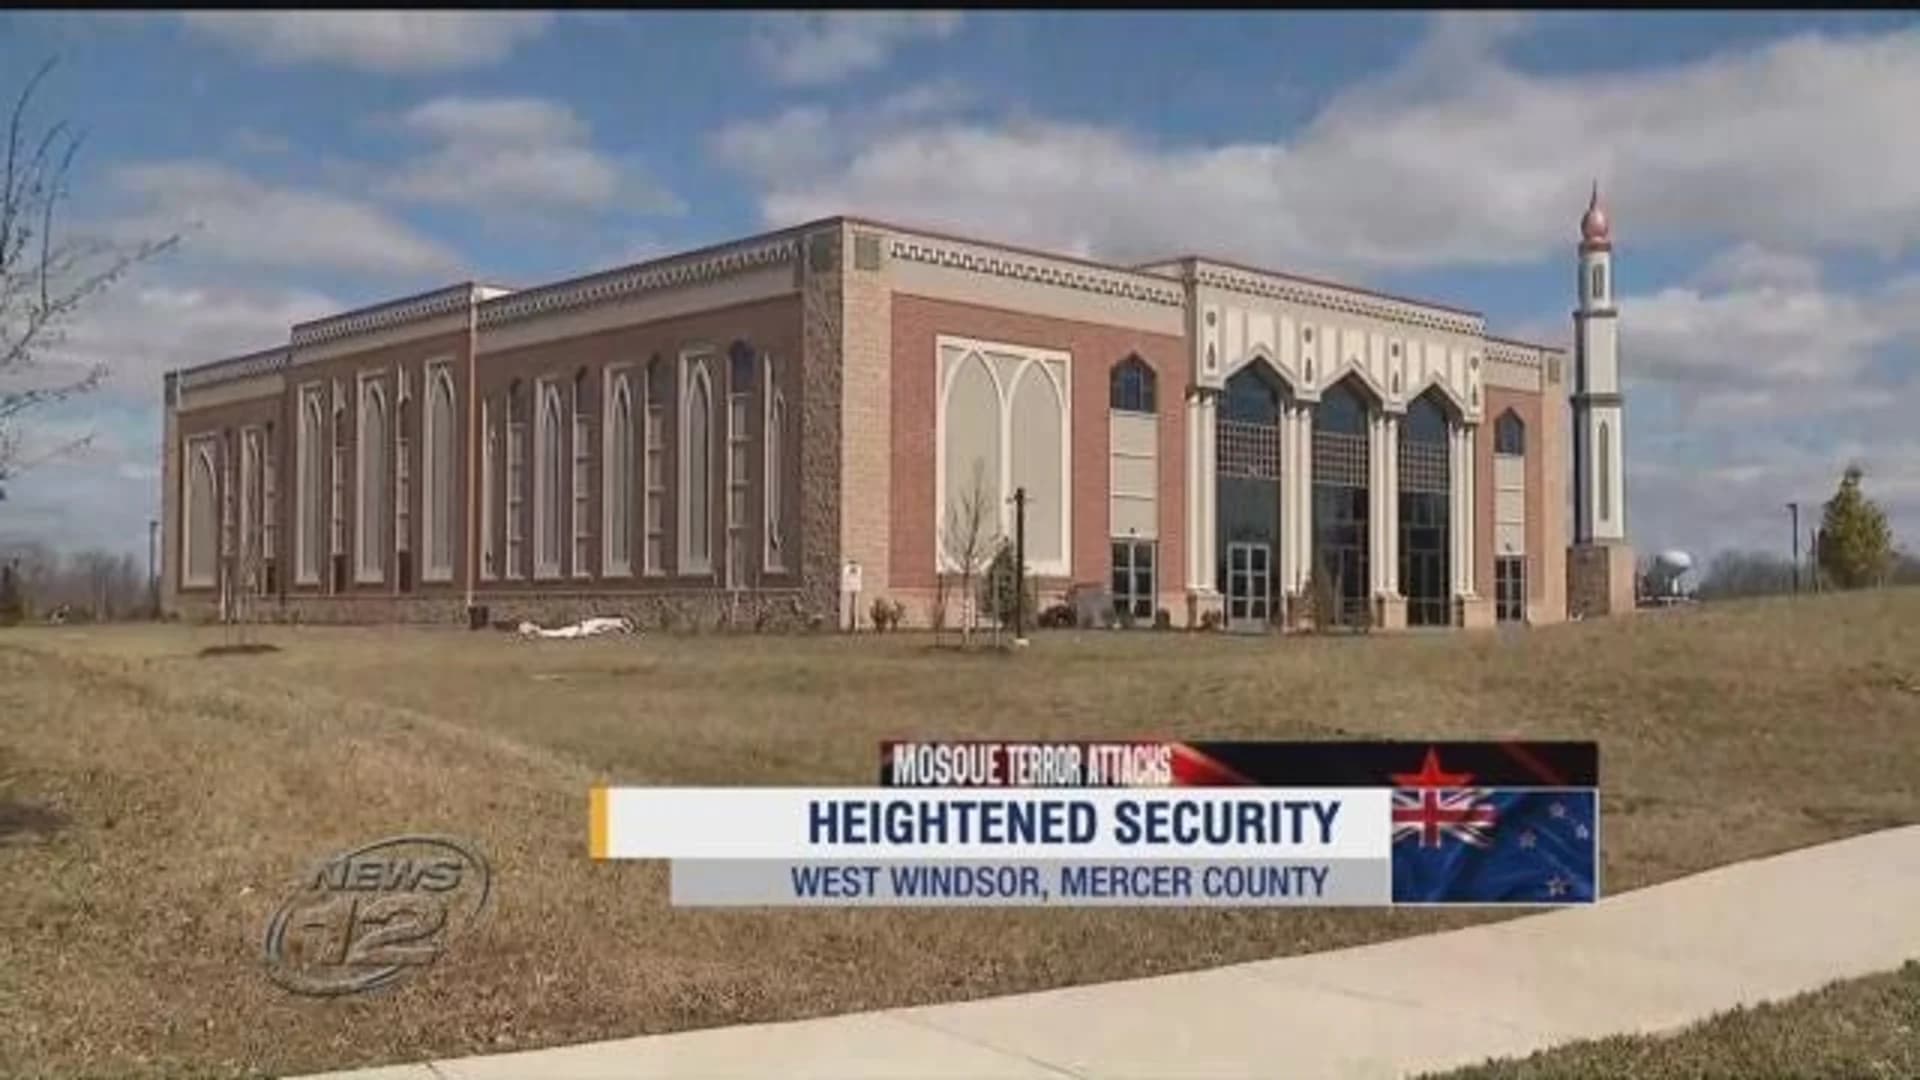 Terror attack in New Zealand prompts heightened security at NJ mosques